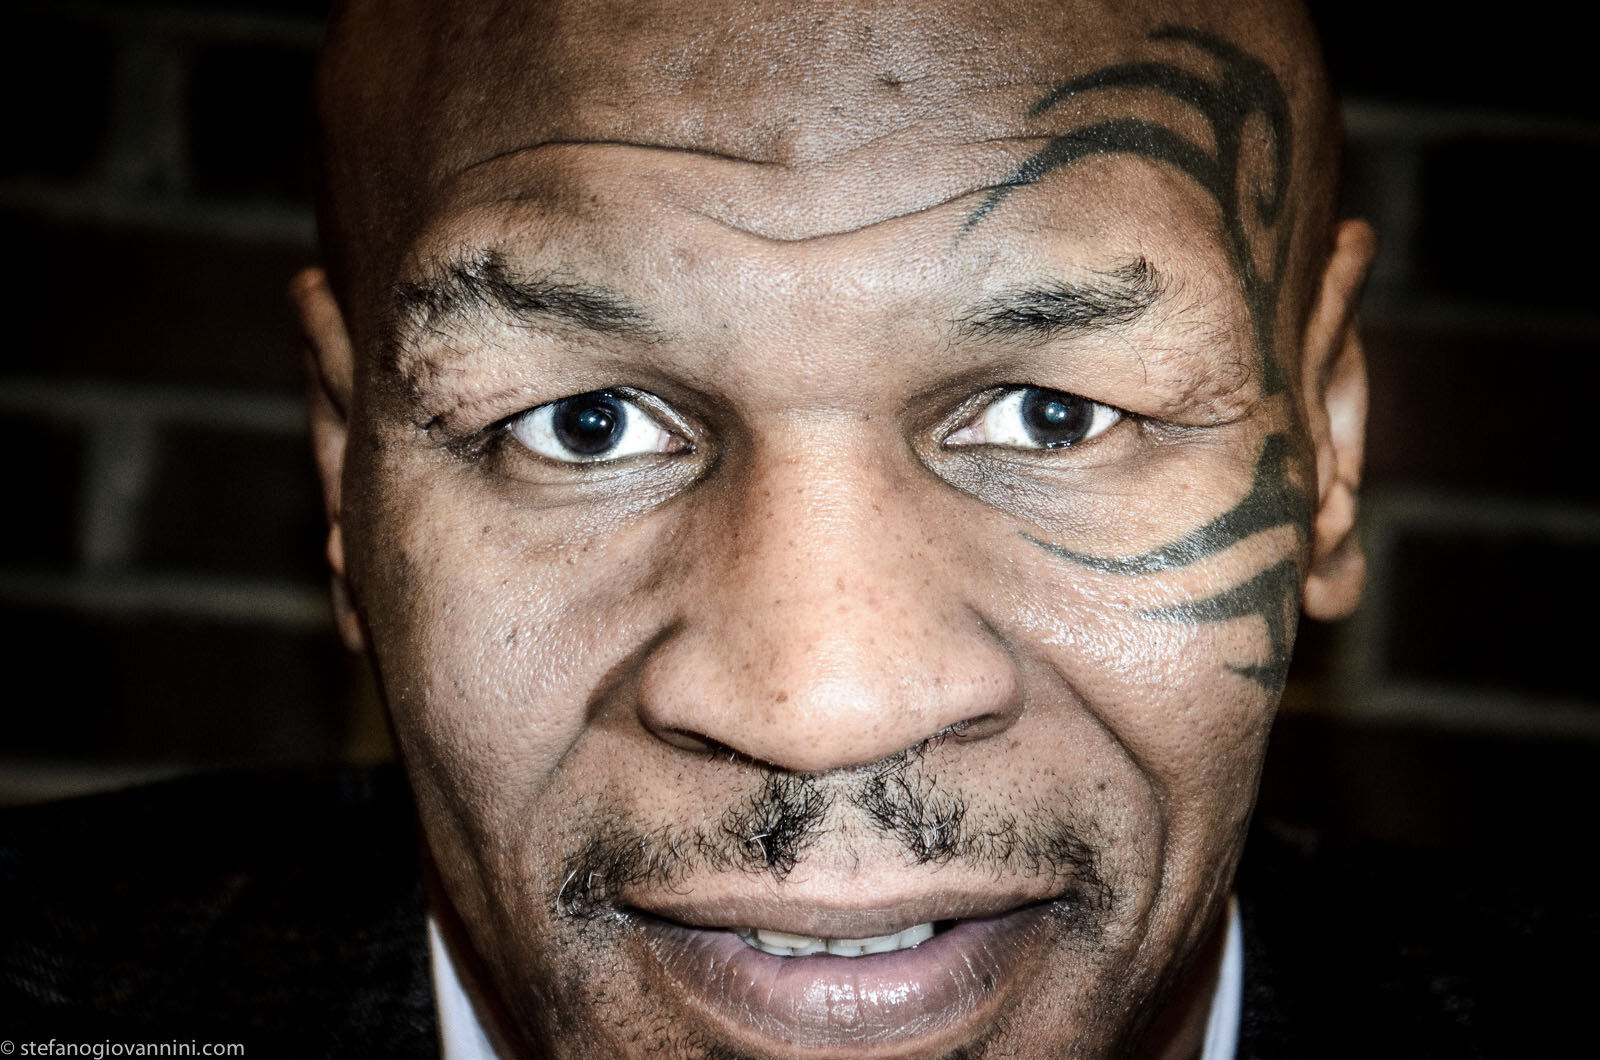  former boxer (sports) Mike Tyson book signingIt is being held at the Bedford Stuyvesant Restoration Corporation at 1368 Fulton St. Bed-Struy Brooklyn NY 